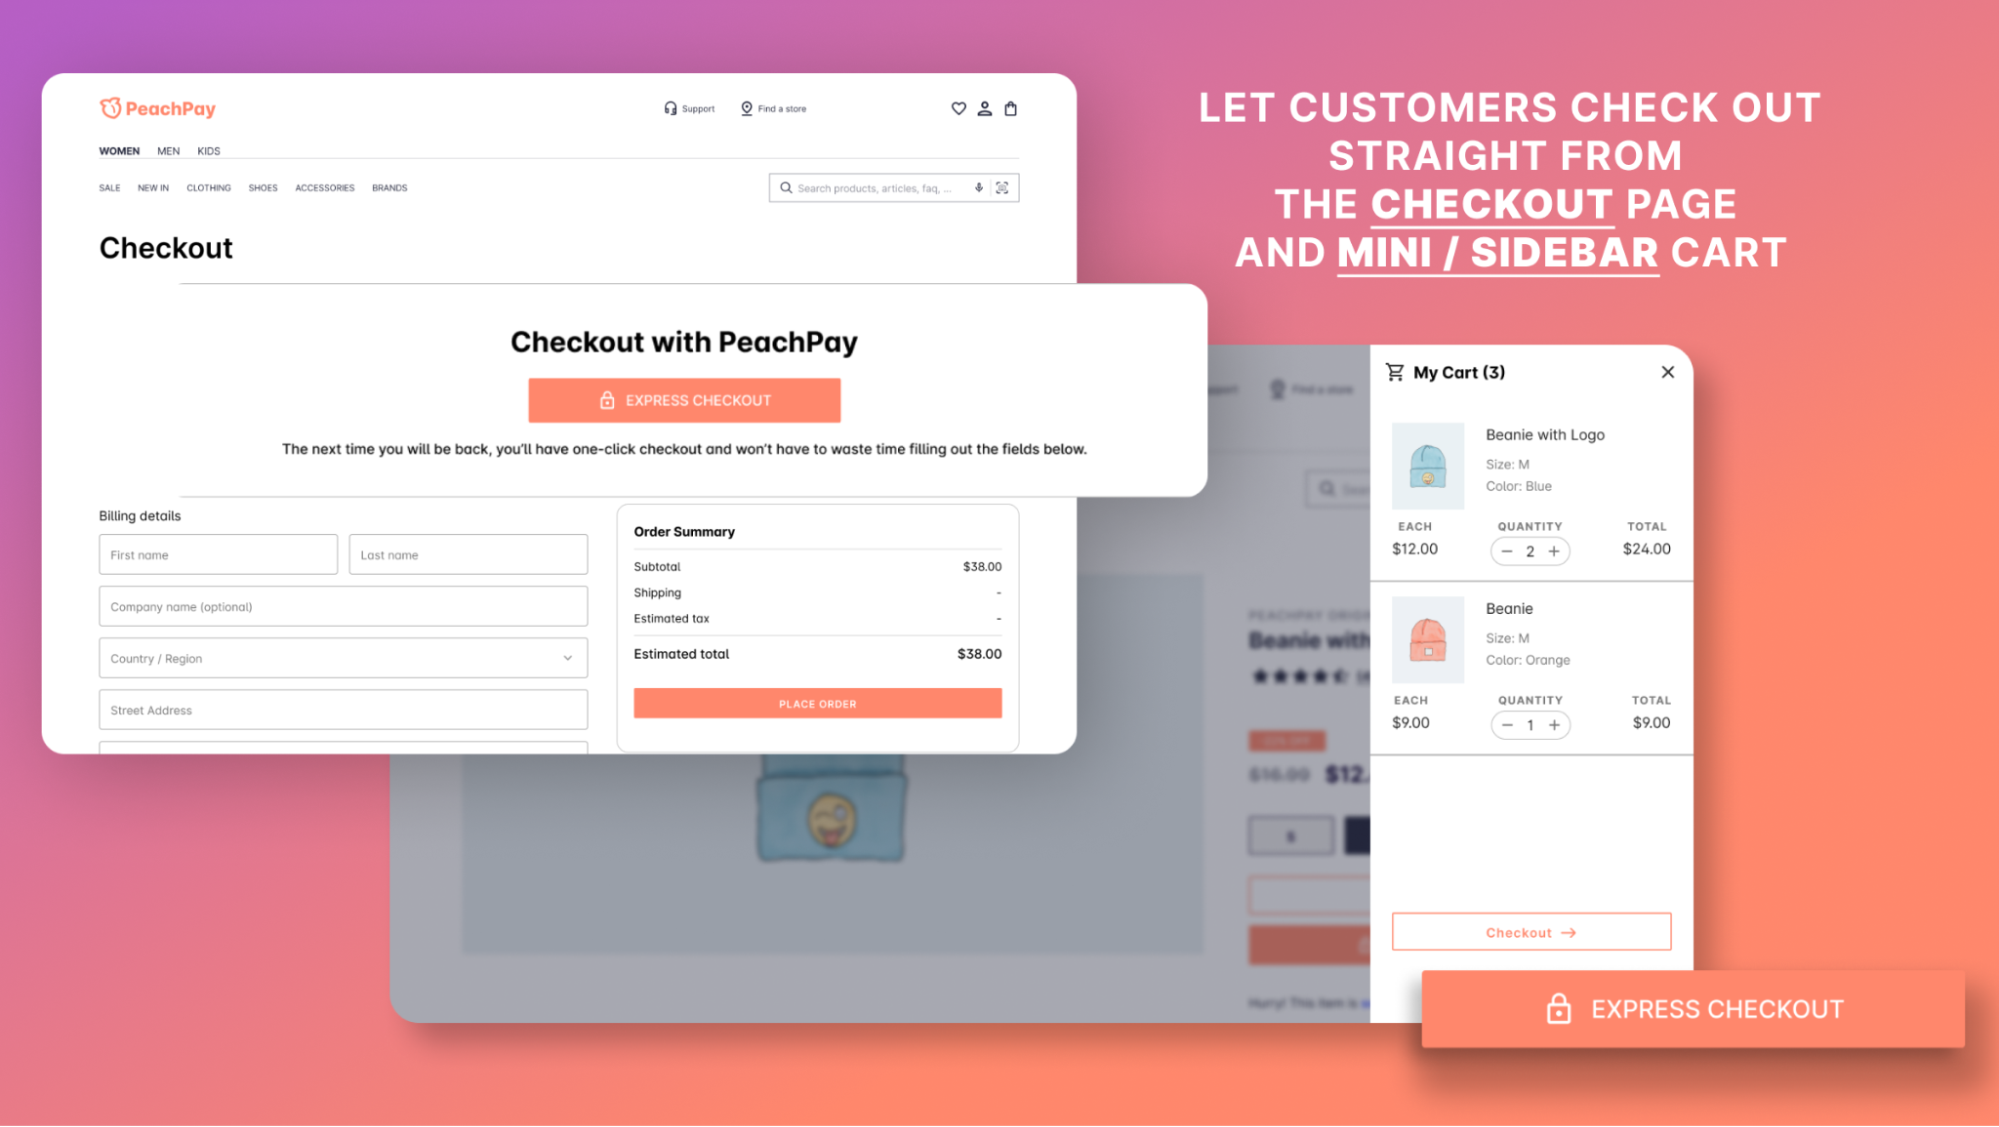 With PeachPay, customers can check out from the sidebar or from product pages, among others 